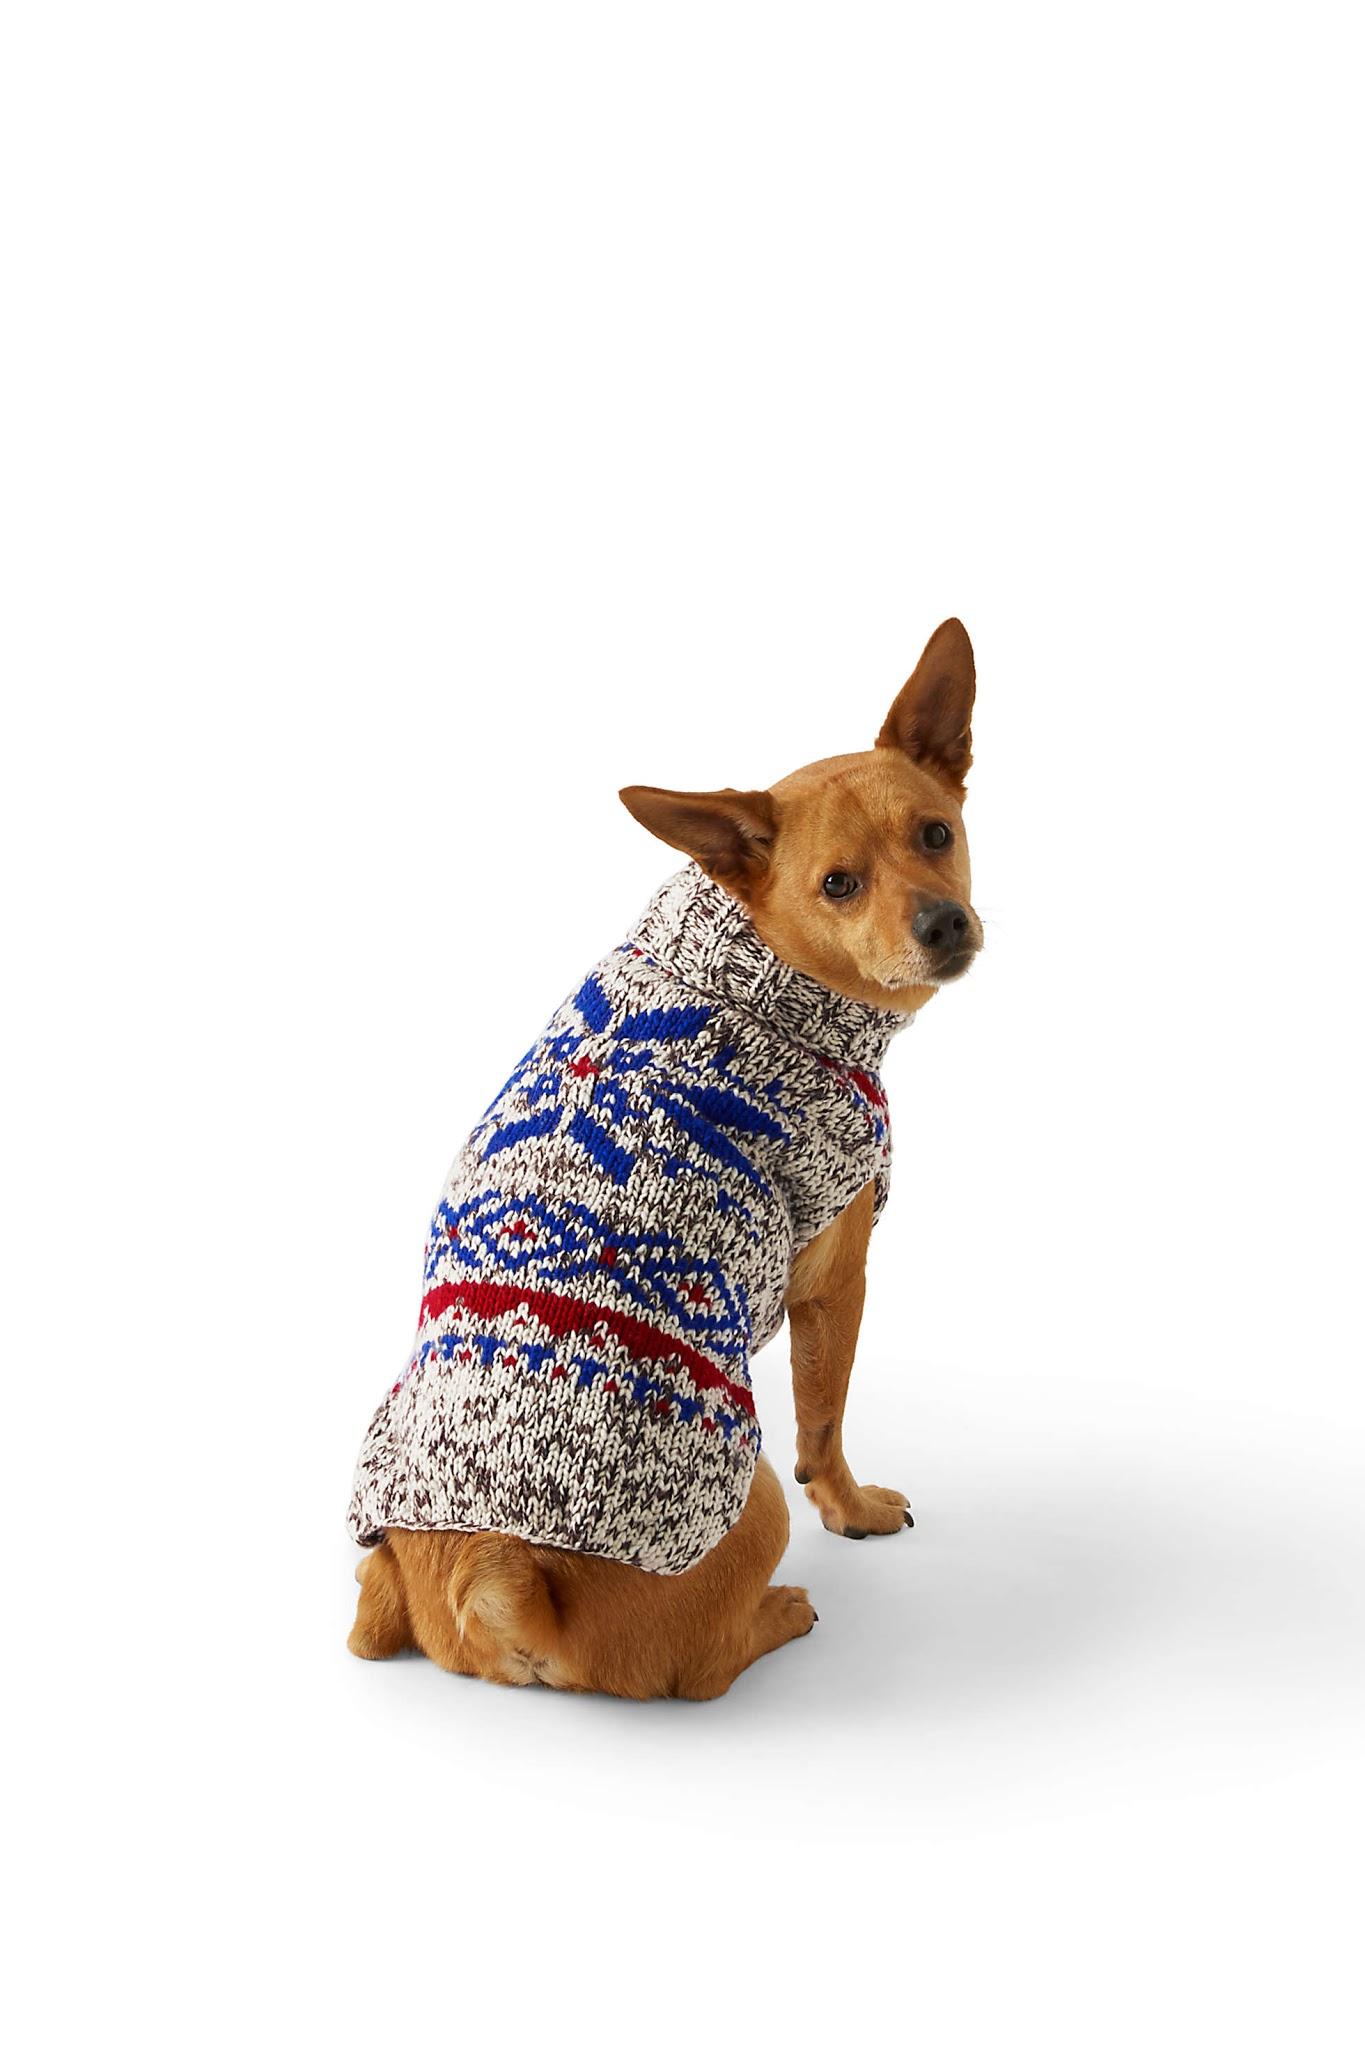 12 Awesome Christmas Sweaters! 68